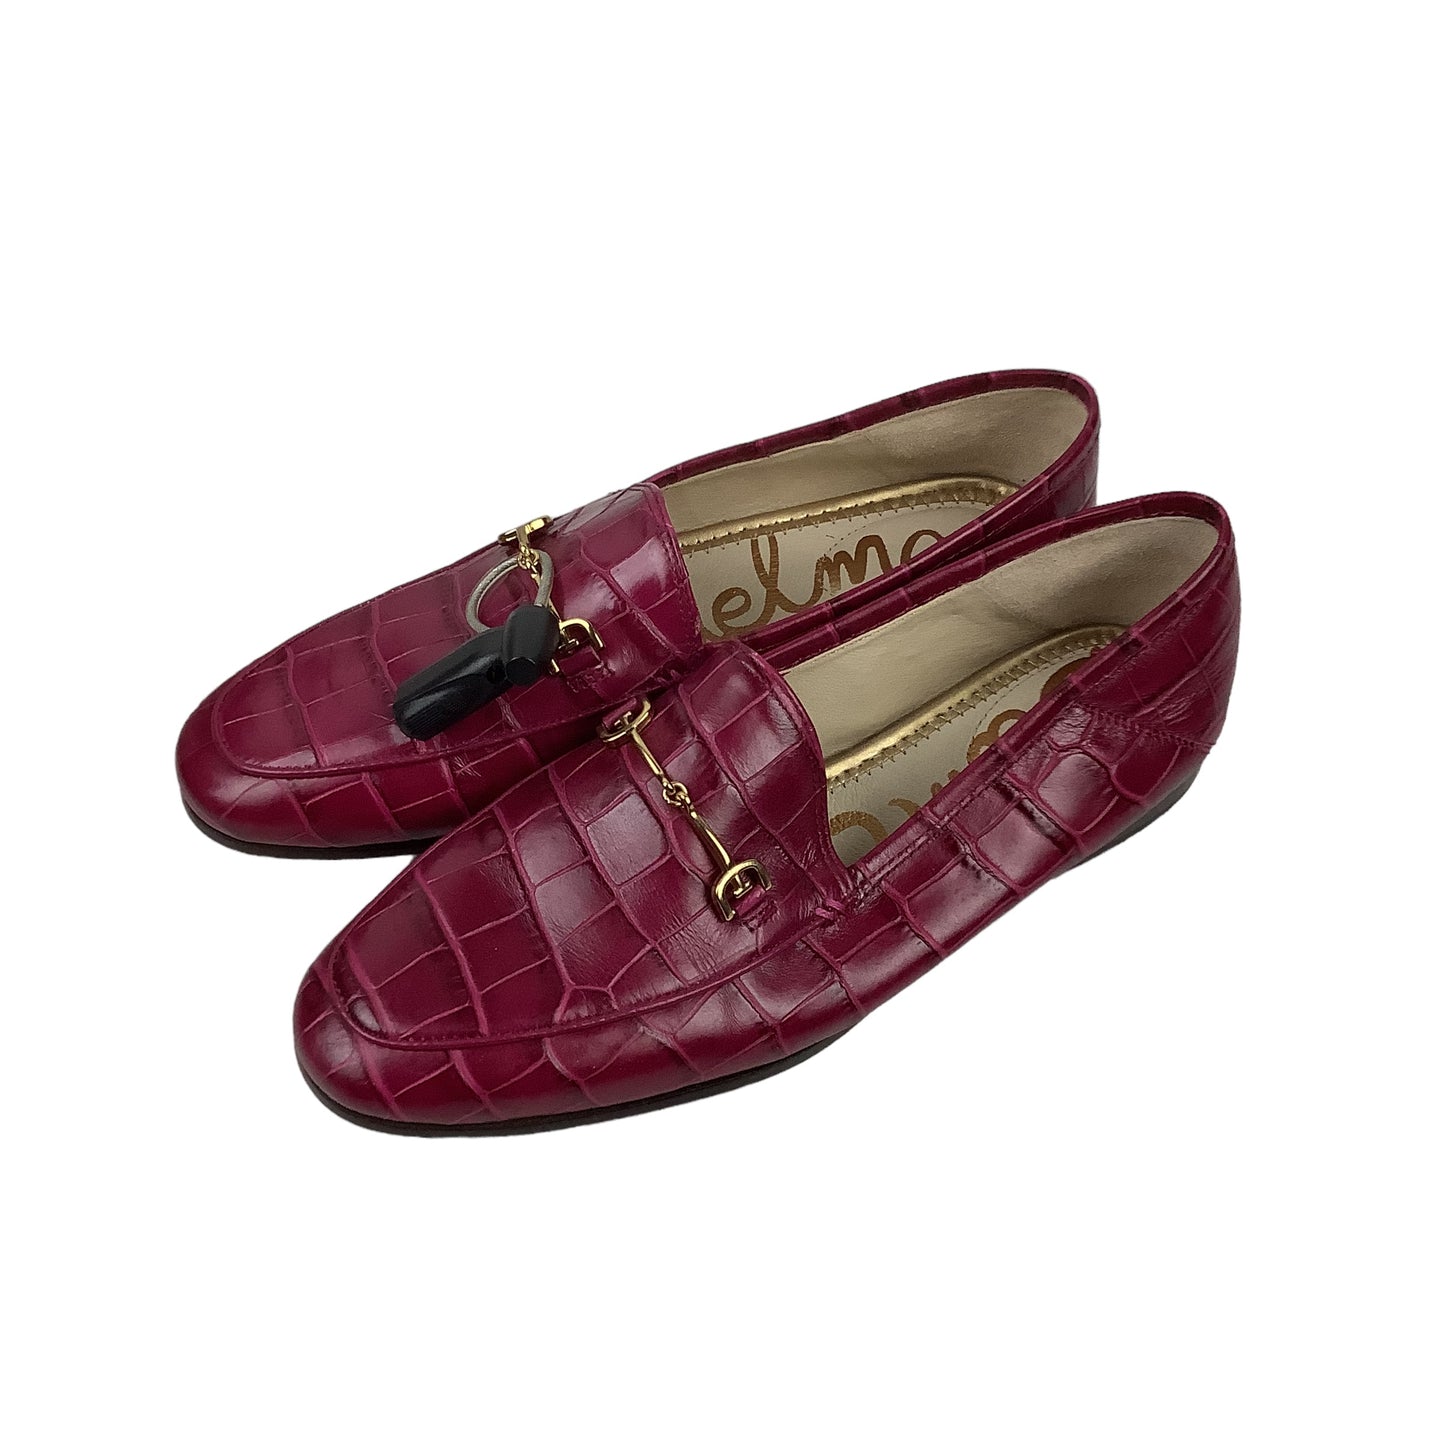 Shoes Flats Loafer Oxford By Sam Edelman  Size: 6.5